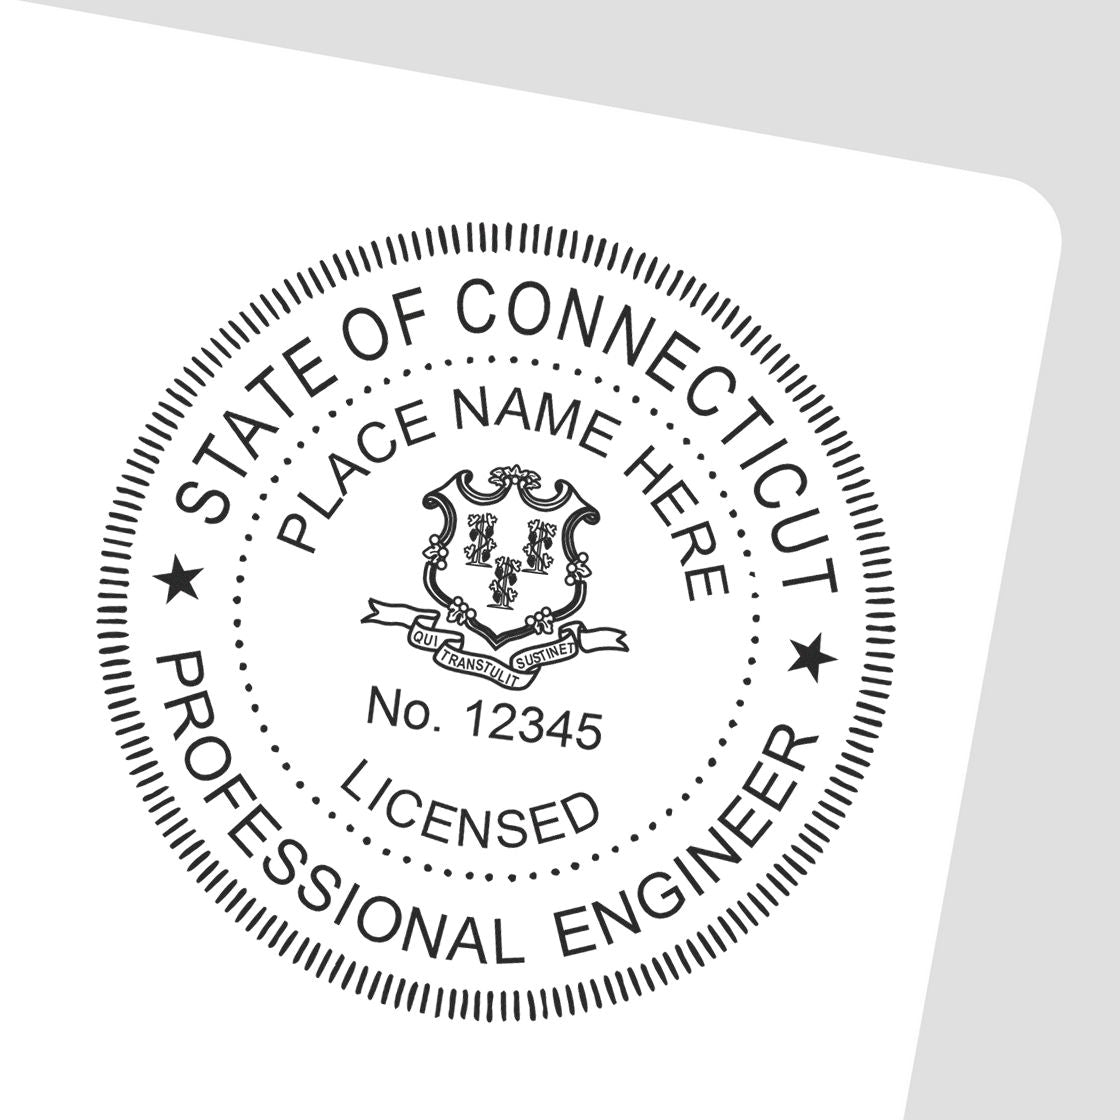 Connecticuts Engineering Seal of Approval: PE Stamp Connecticut 101 Feature Image